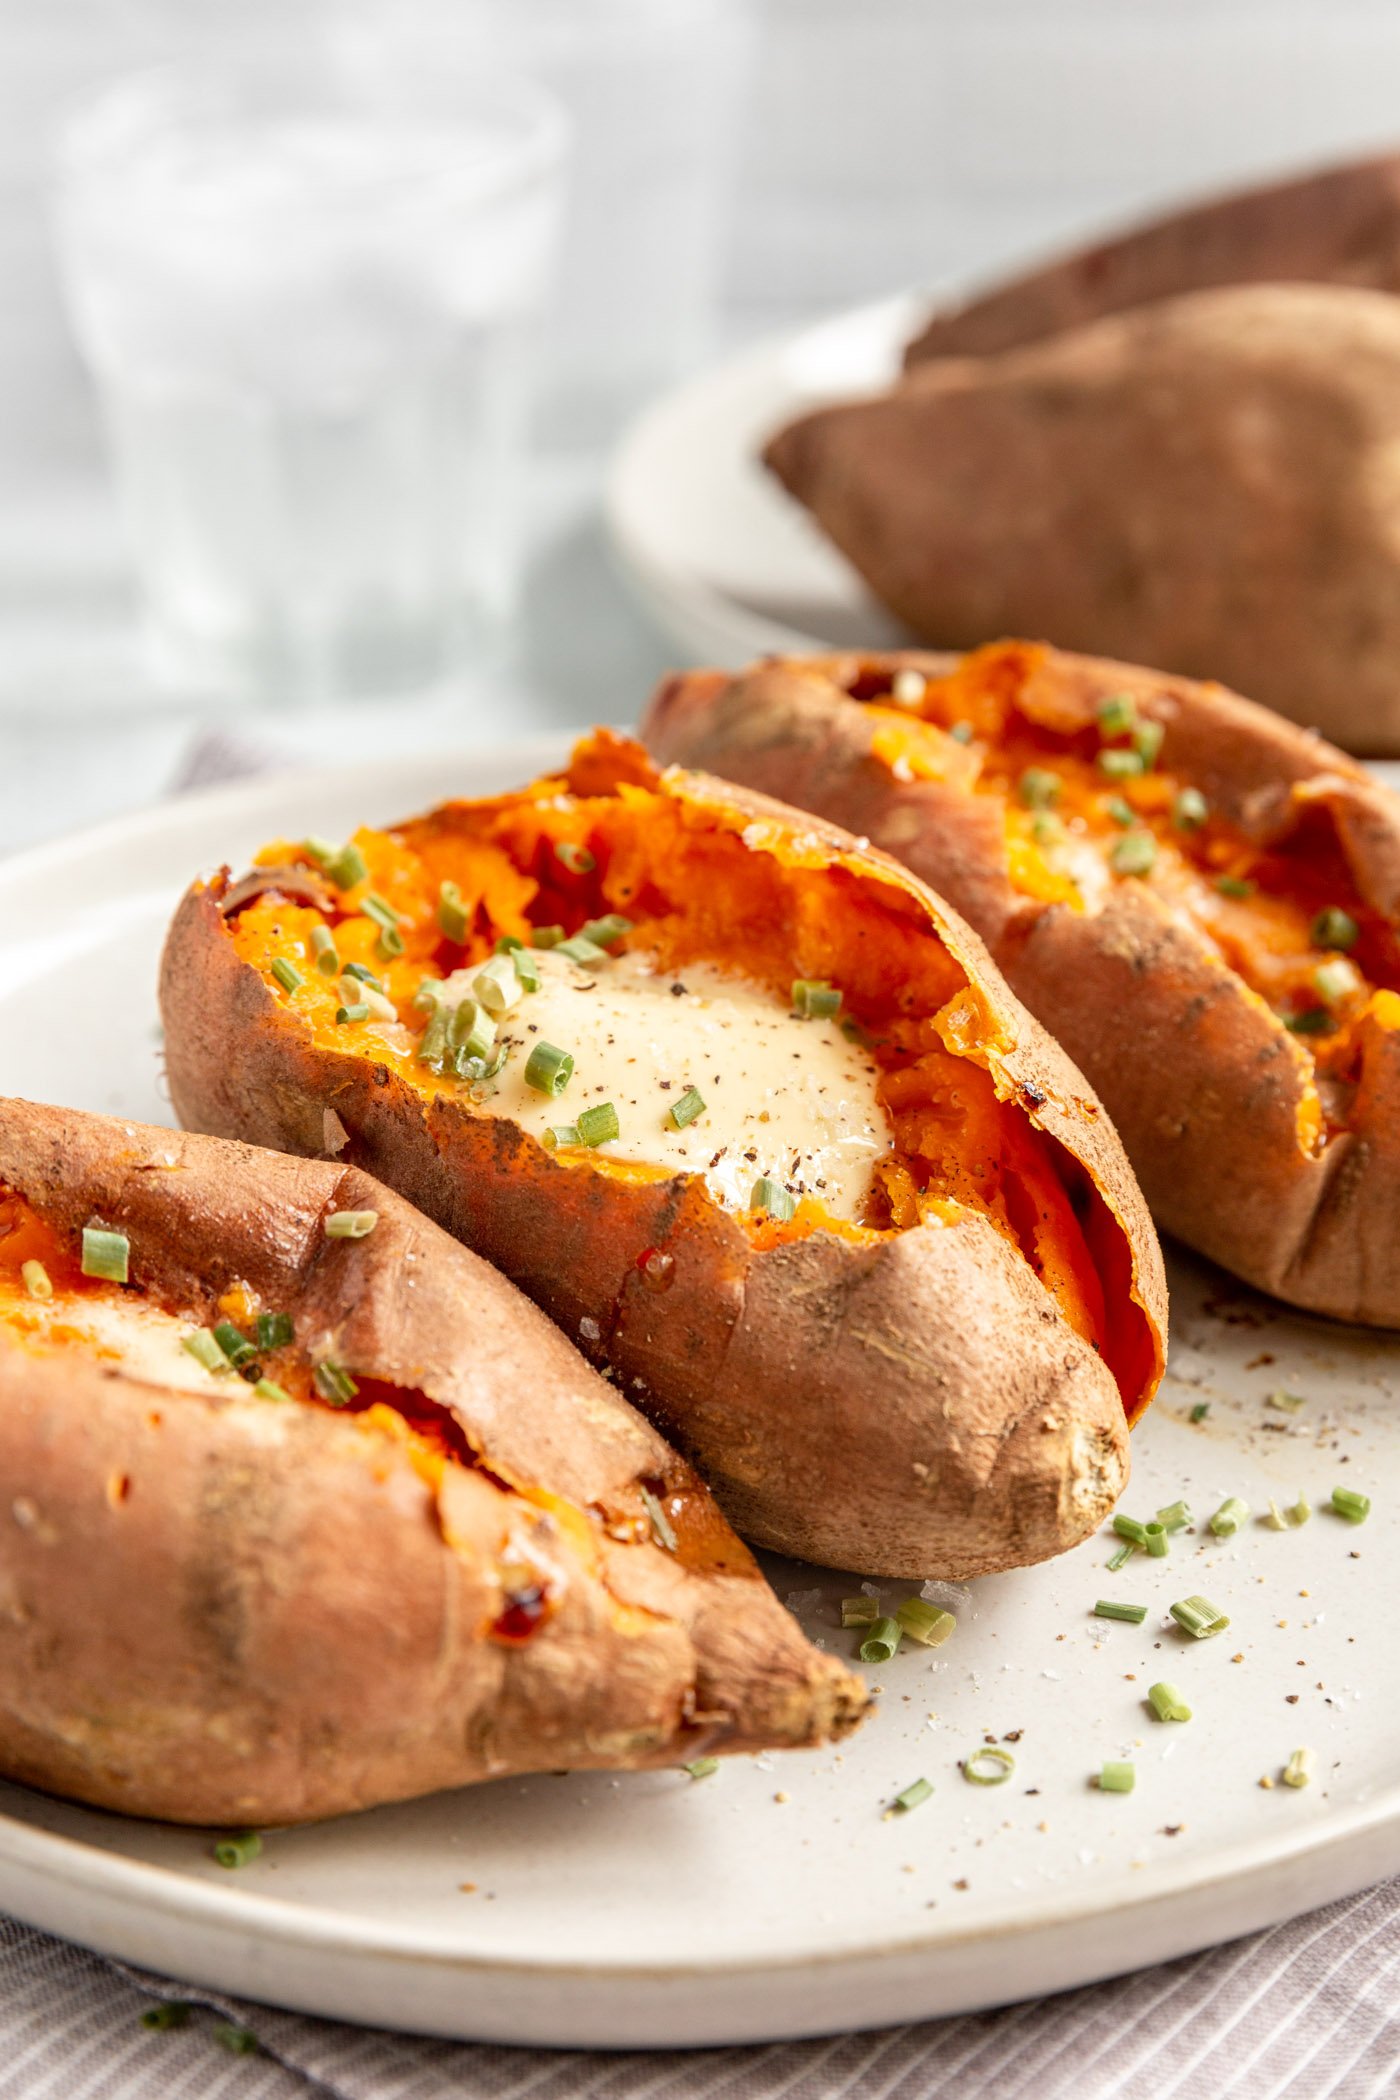 Oven baked sweet potatoes on a plate, cut open and topped with melting butter and chives.